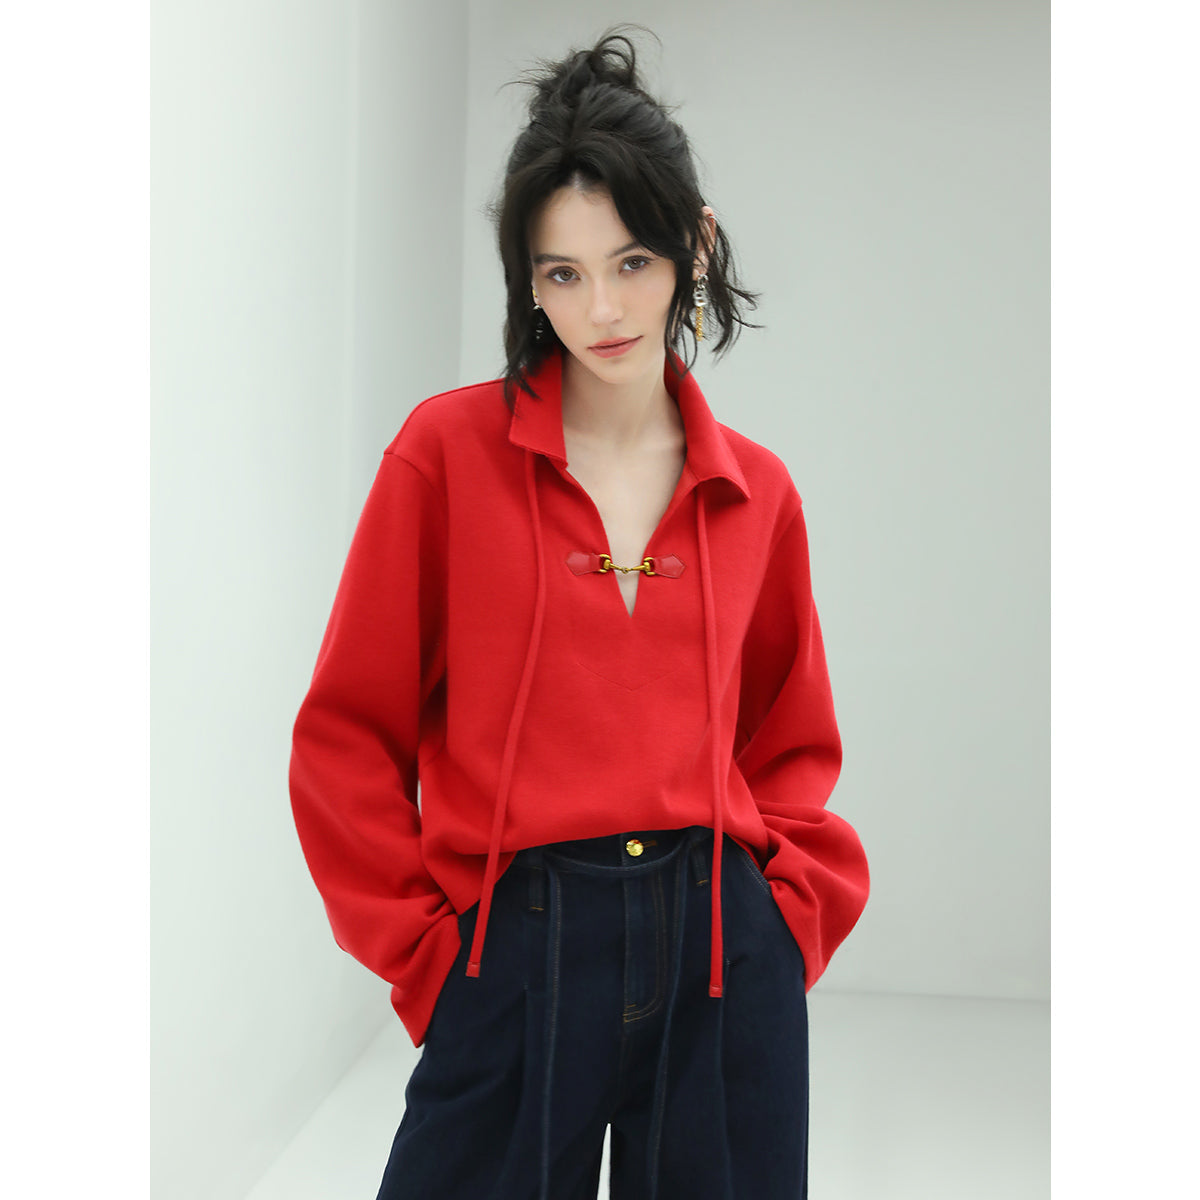 comfy-drawstring-wide-sleeved-red-sweater-with-collar-buckle_all_red_1.jpg